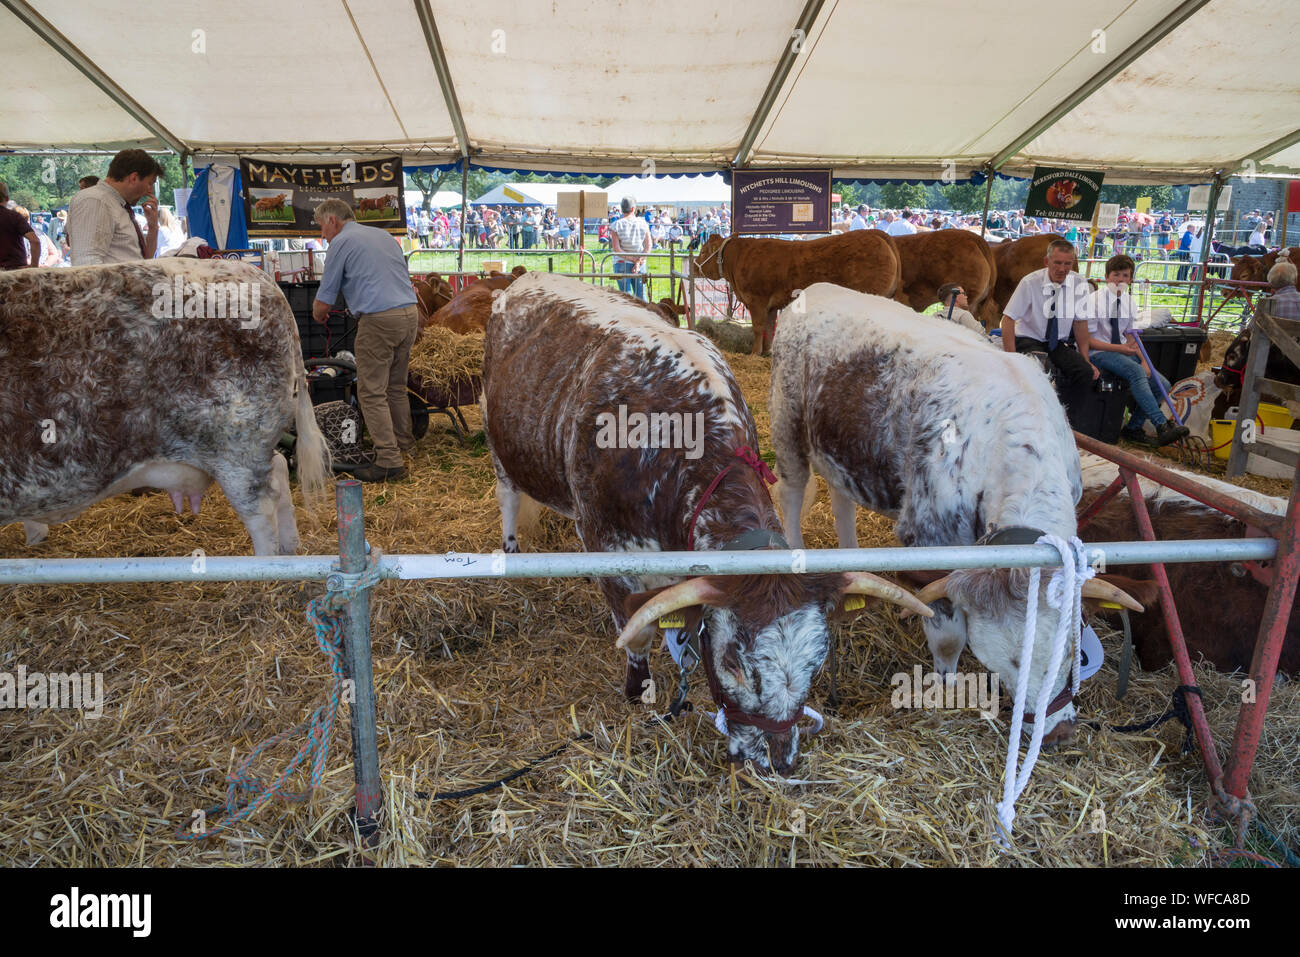 Hope Show on the August bank holiday 2019 in Derbyshire, England. Cattle in the shade of the marquee. Stock Photo